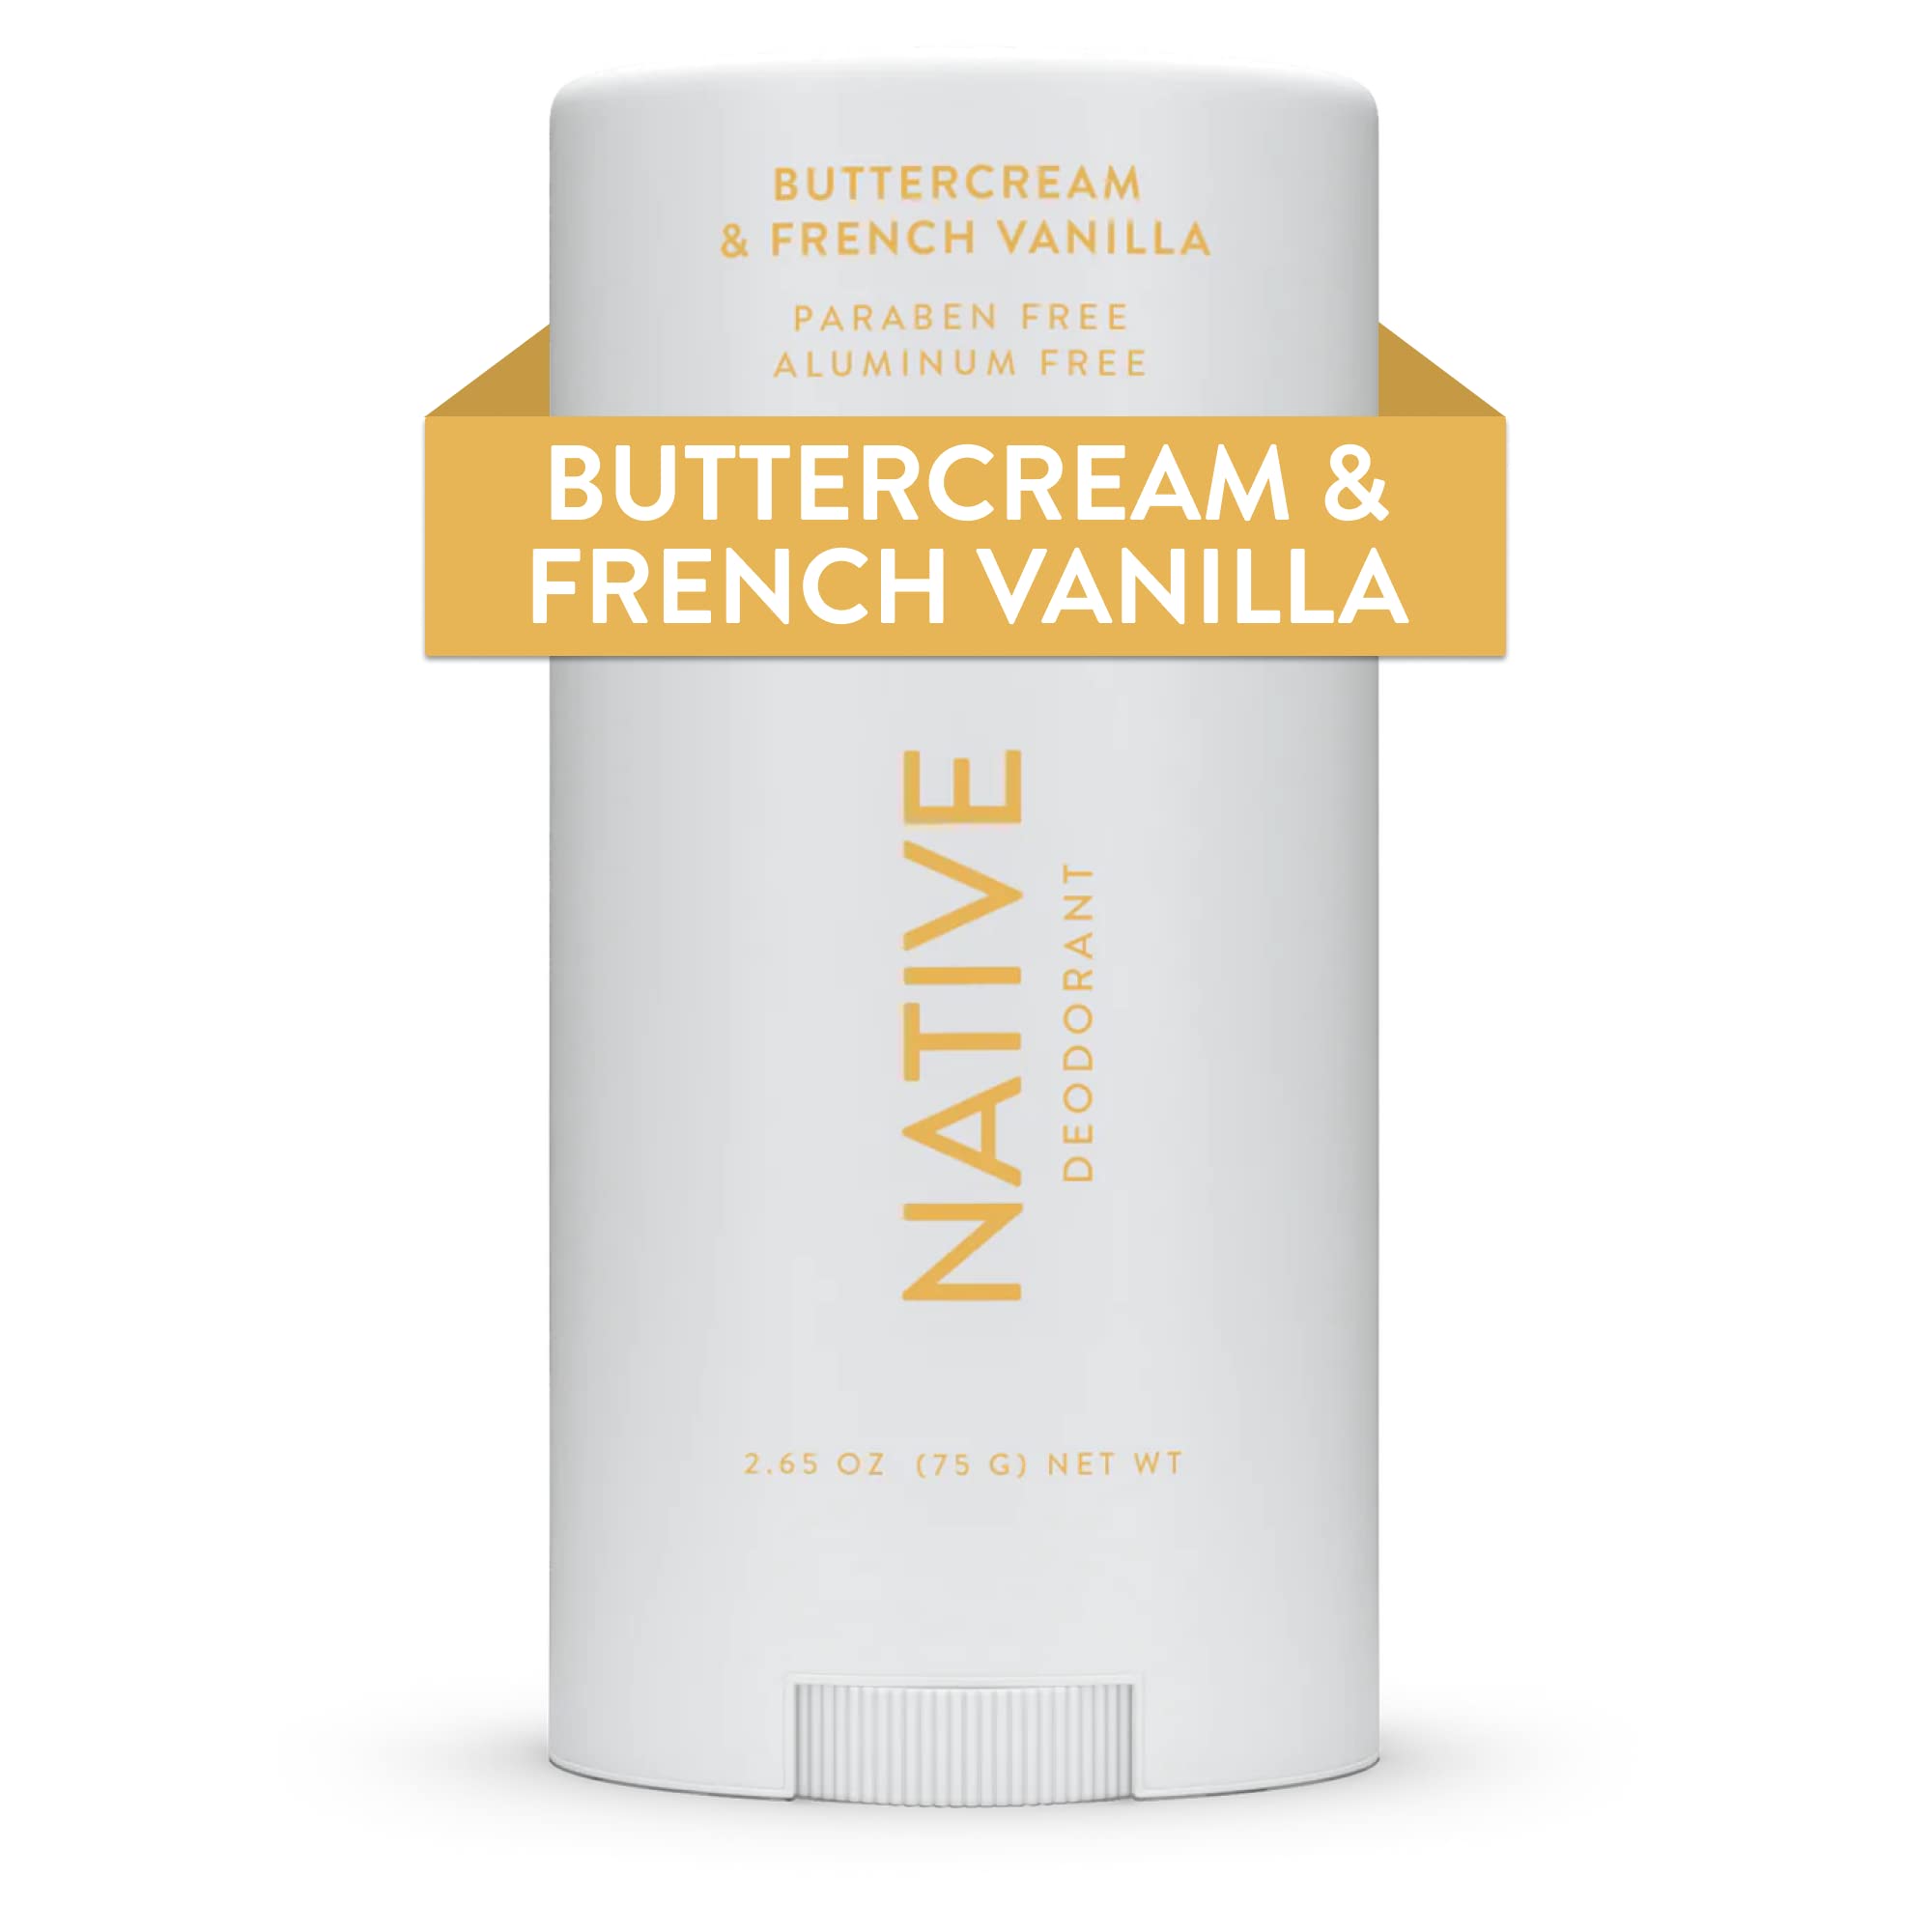 Native Deodorant | Natural Deodorant Seasonal Scents for Women and Men, Aluminum Free with Baking Soda, Probiotics, Coconut Oil and Shea Butter | Buttercream & French Vanilla